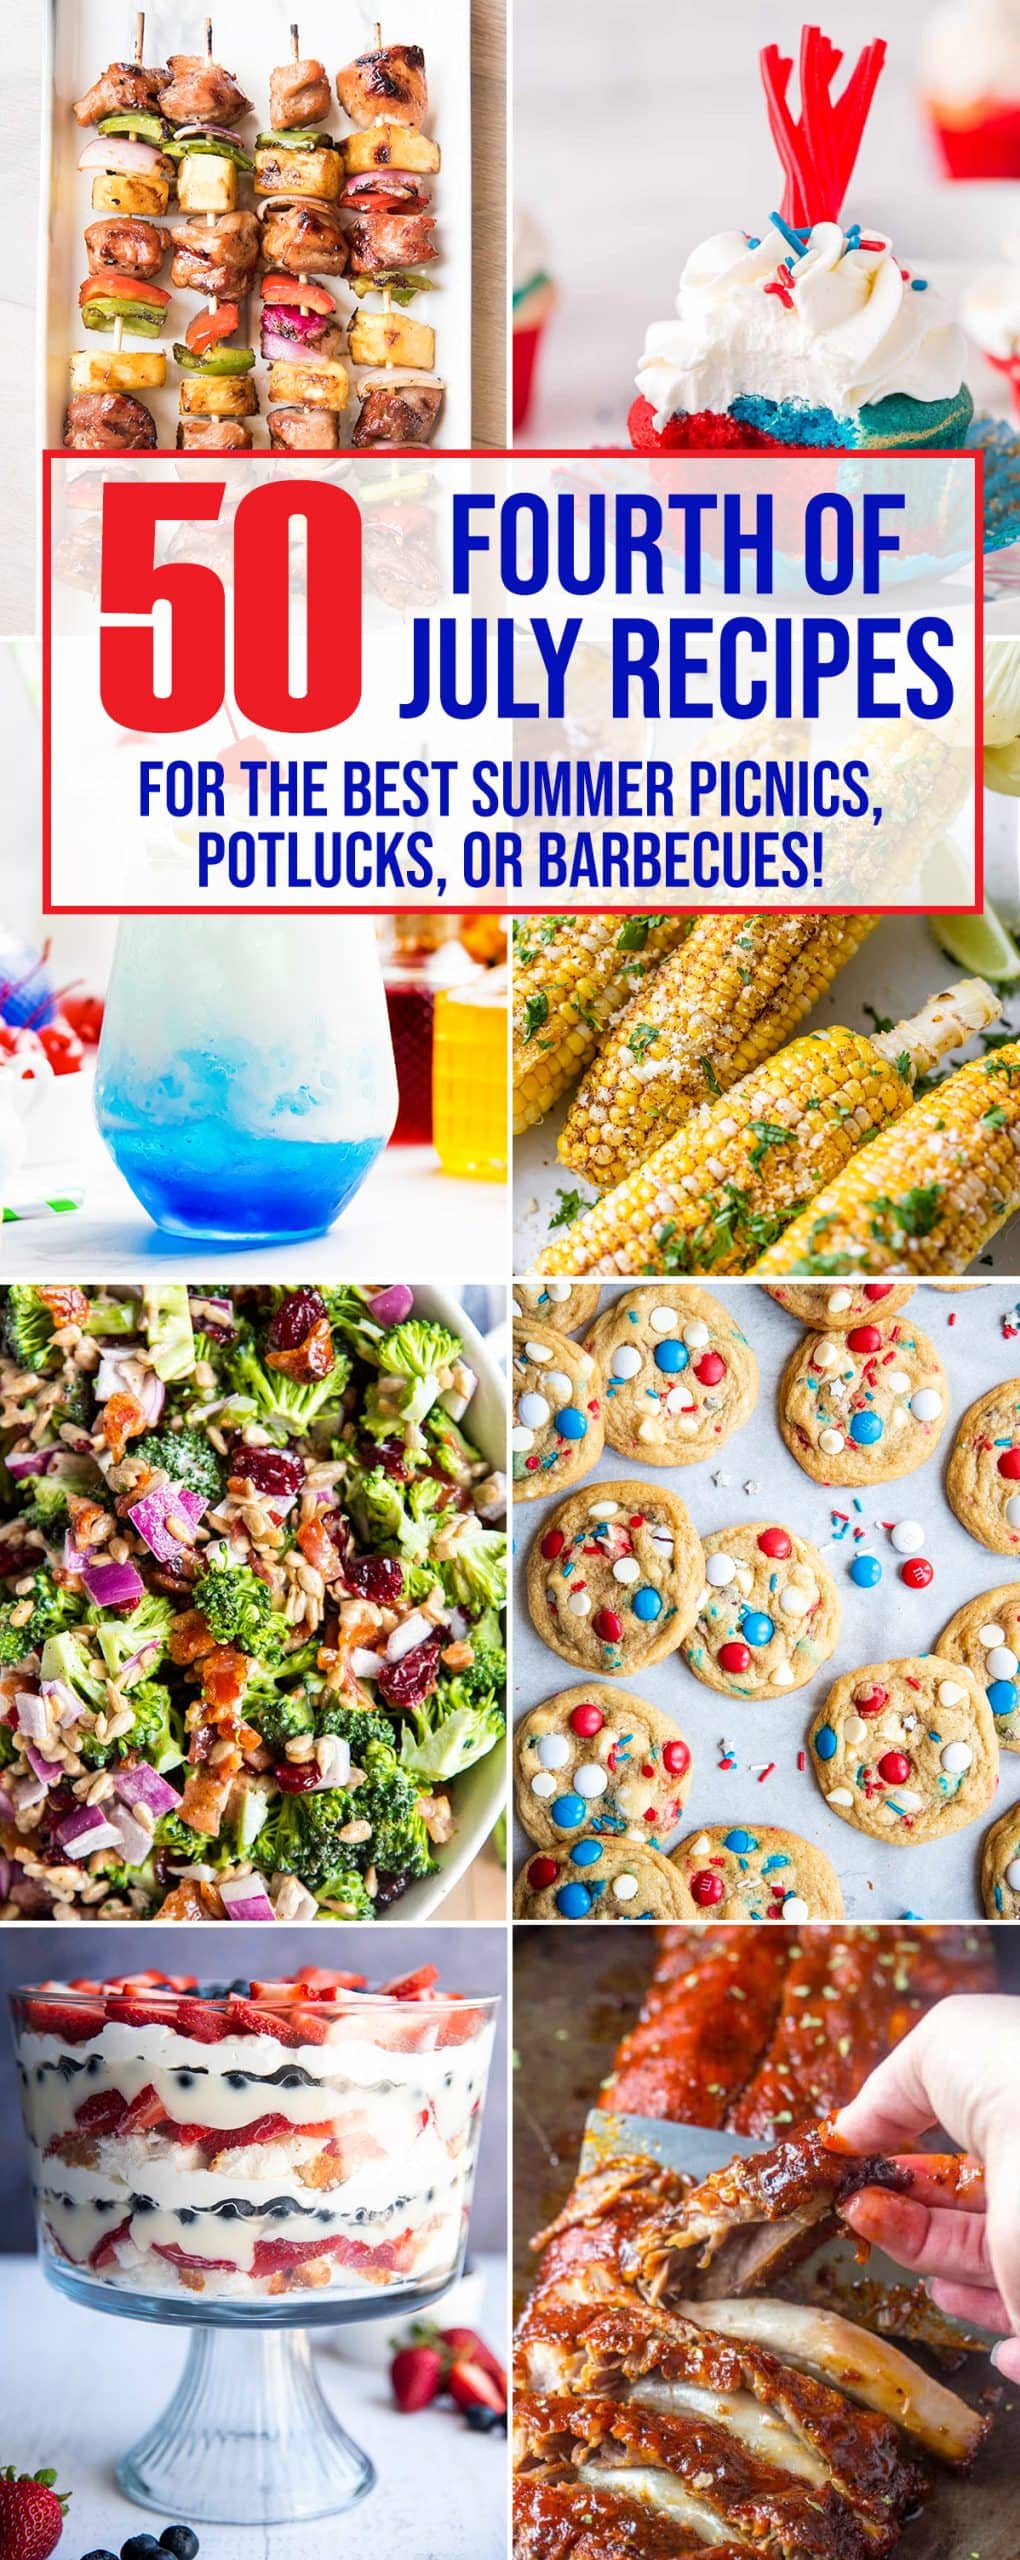 A collage of 8 summer foods, with a text block saying Fourth of July Recipes.